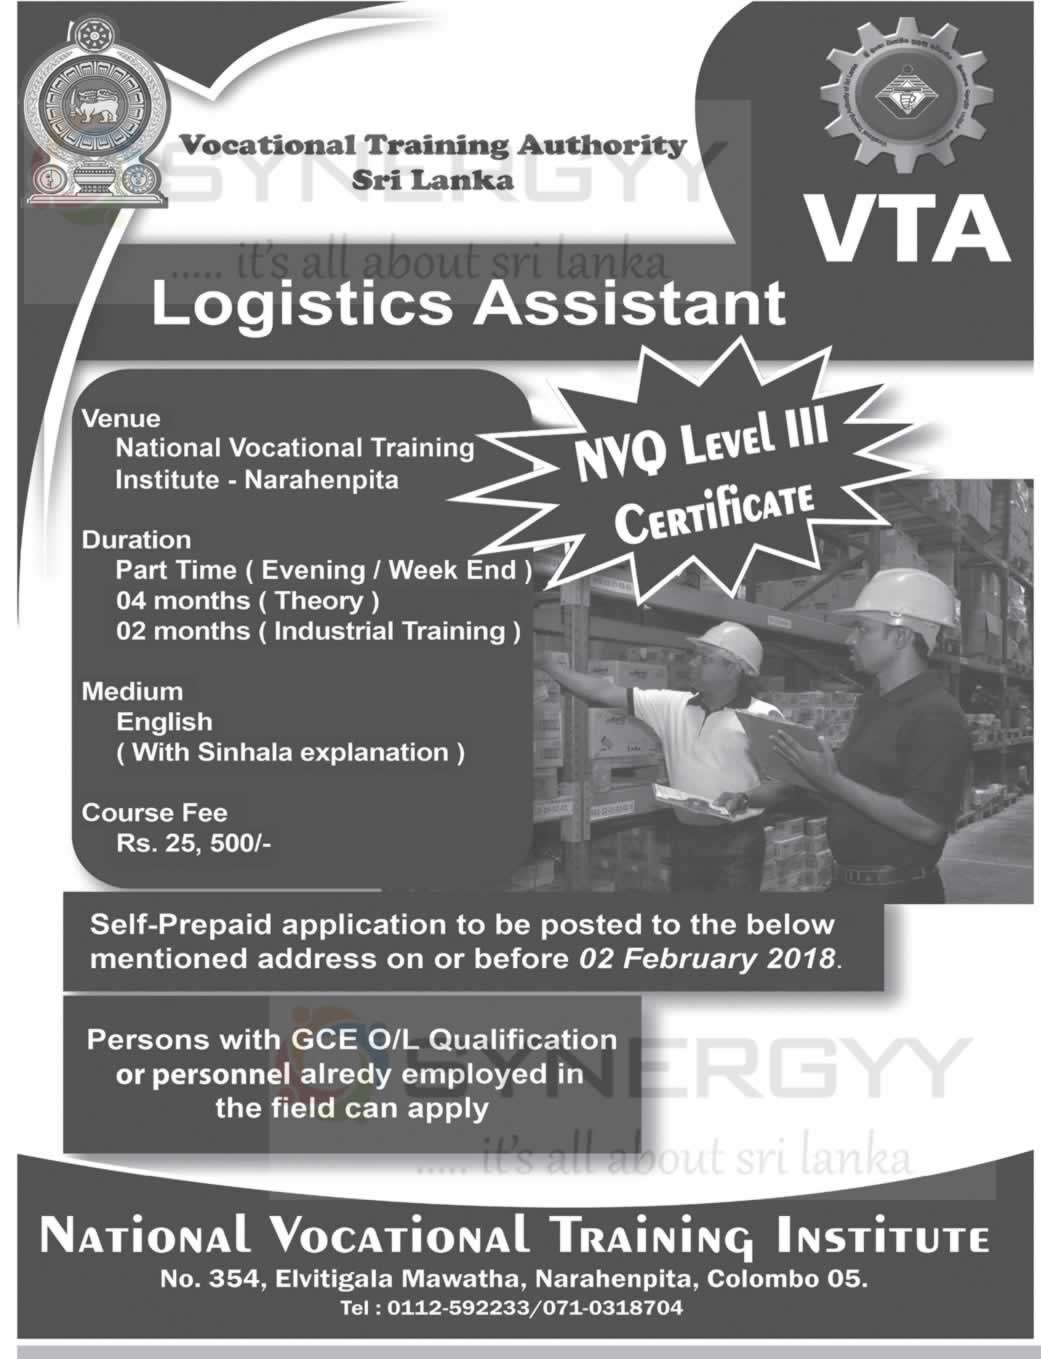 Logistics Assistant Course by Vocational Training Authority Sri Lanka